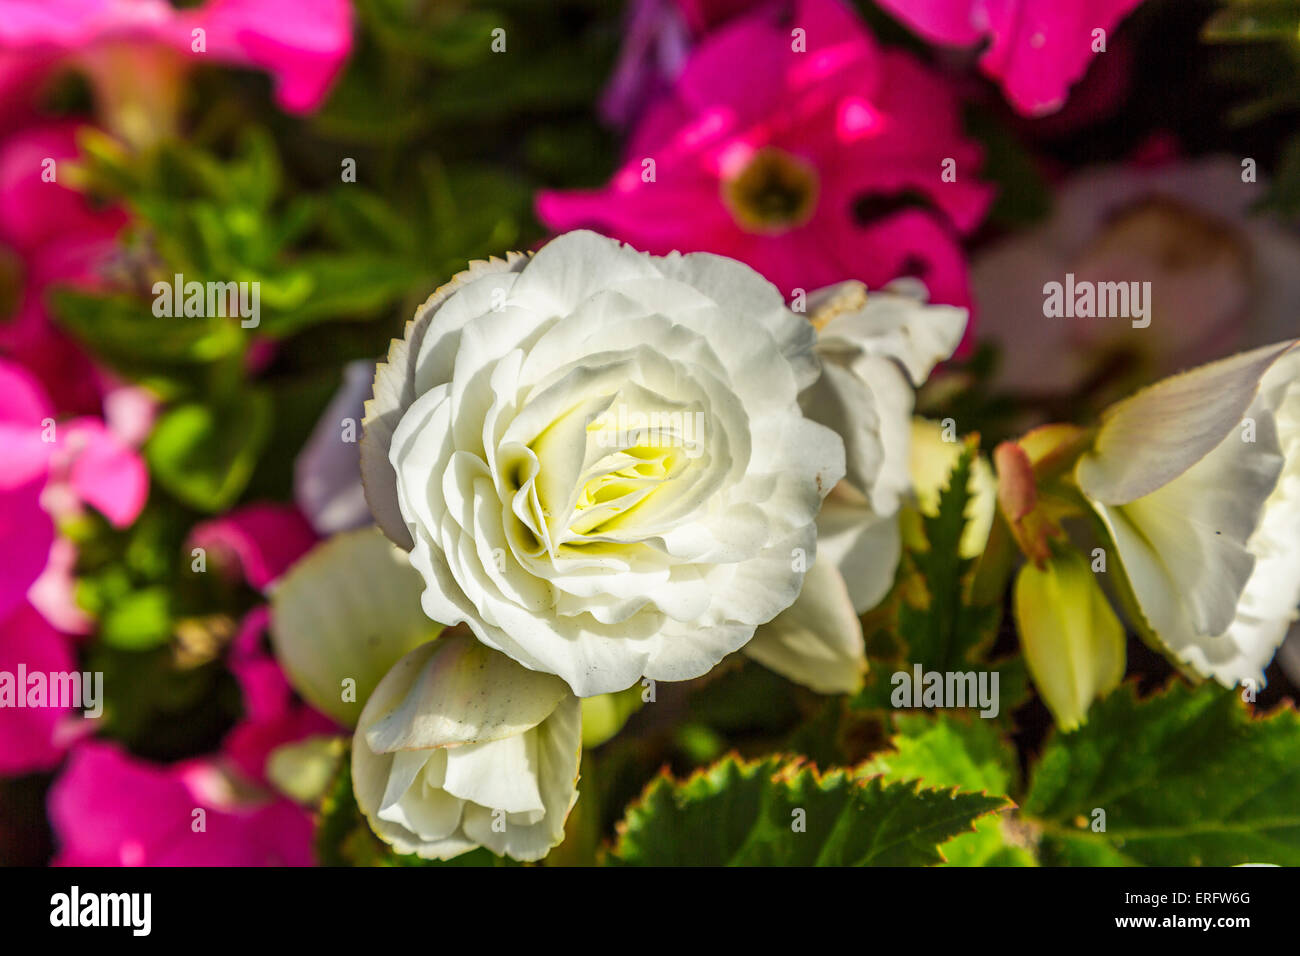 English rose flower blooms in an English country garden Stock Photo